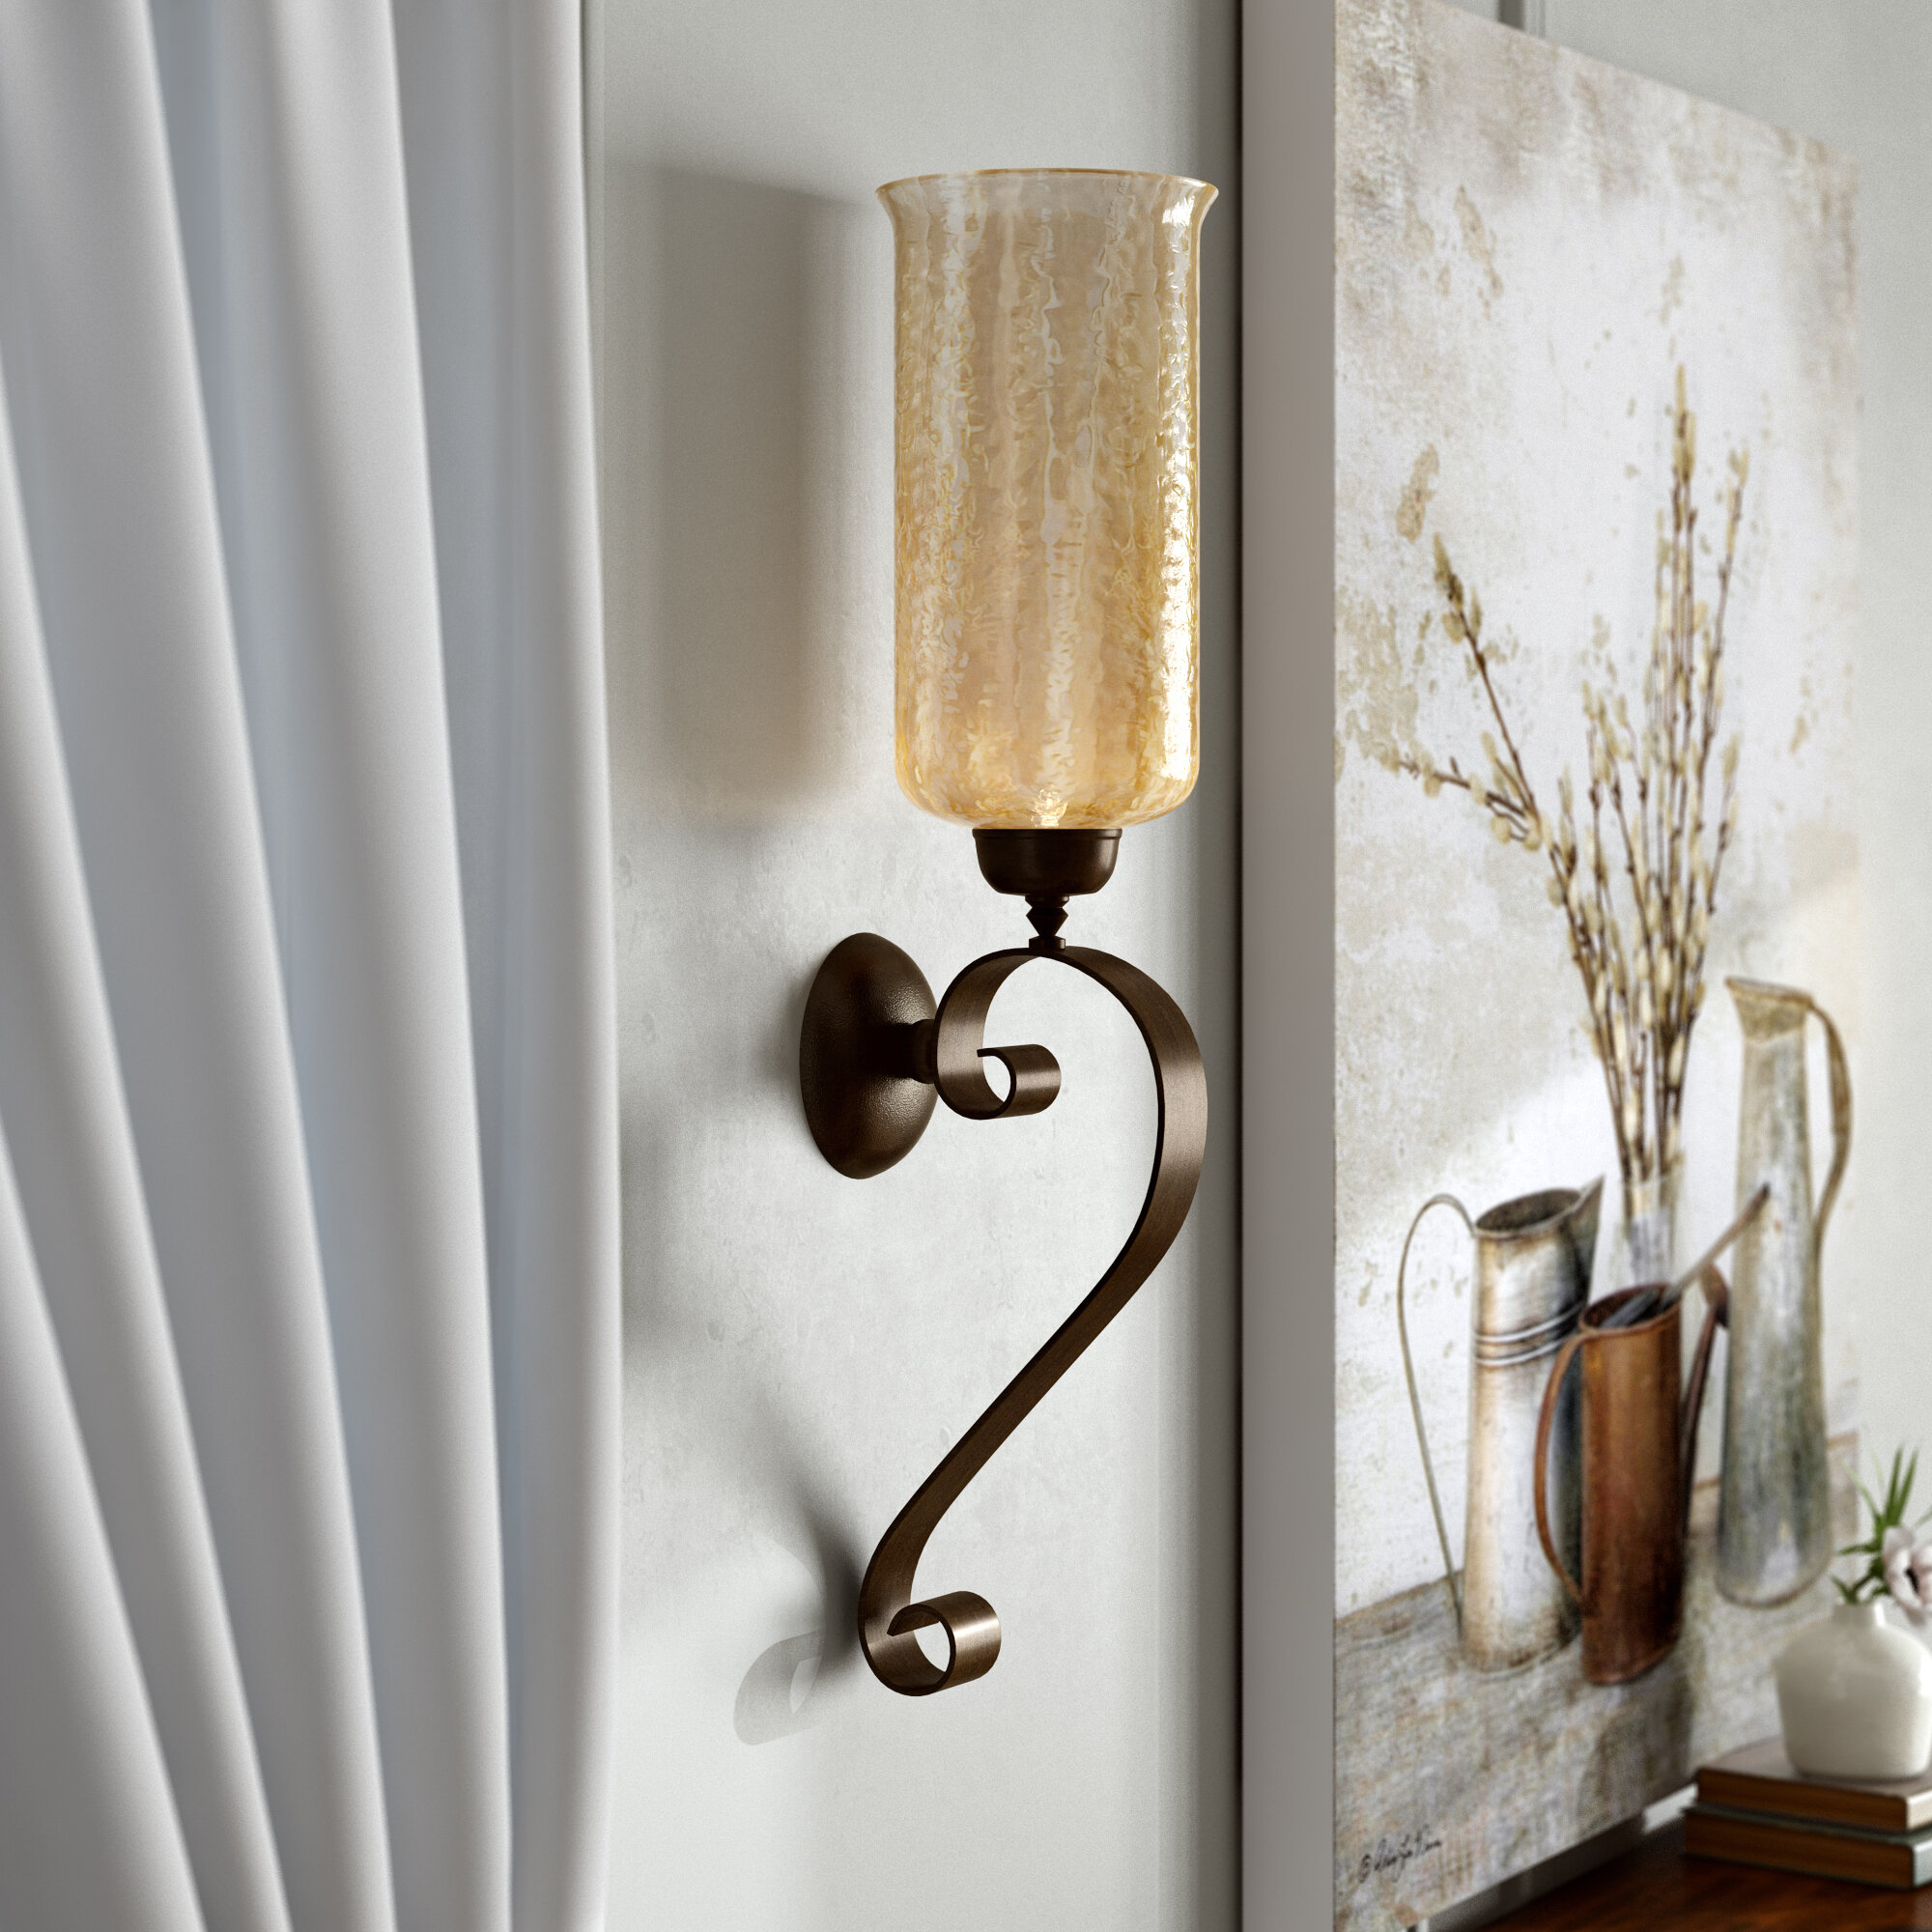 NEW 30" AGED BRONZE HAND FORGED METAL GLASS WALL SCONCE CANDLE HOLDER TUSCAN 